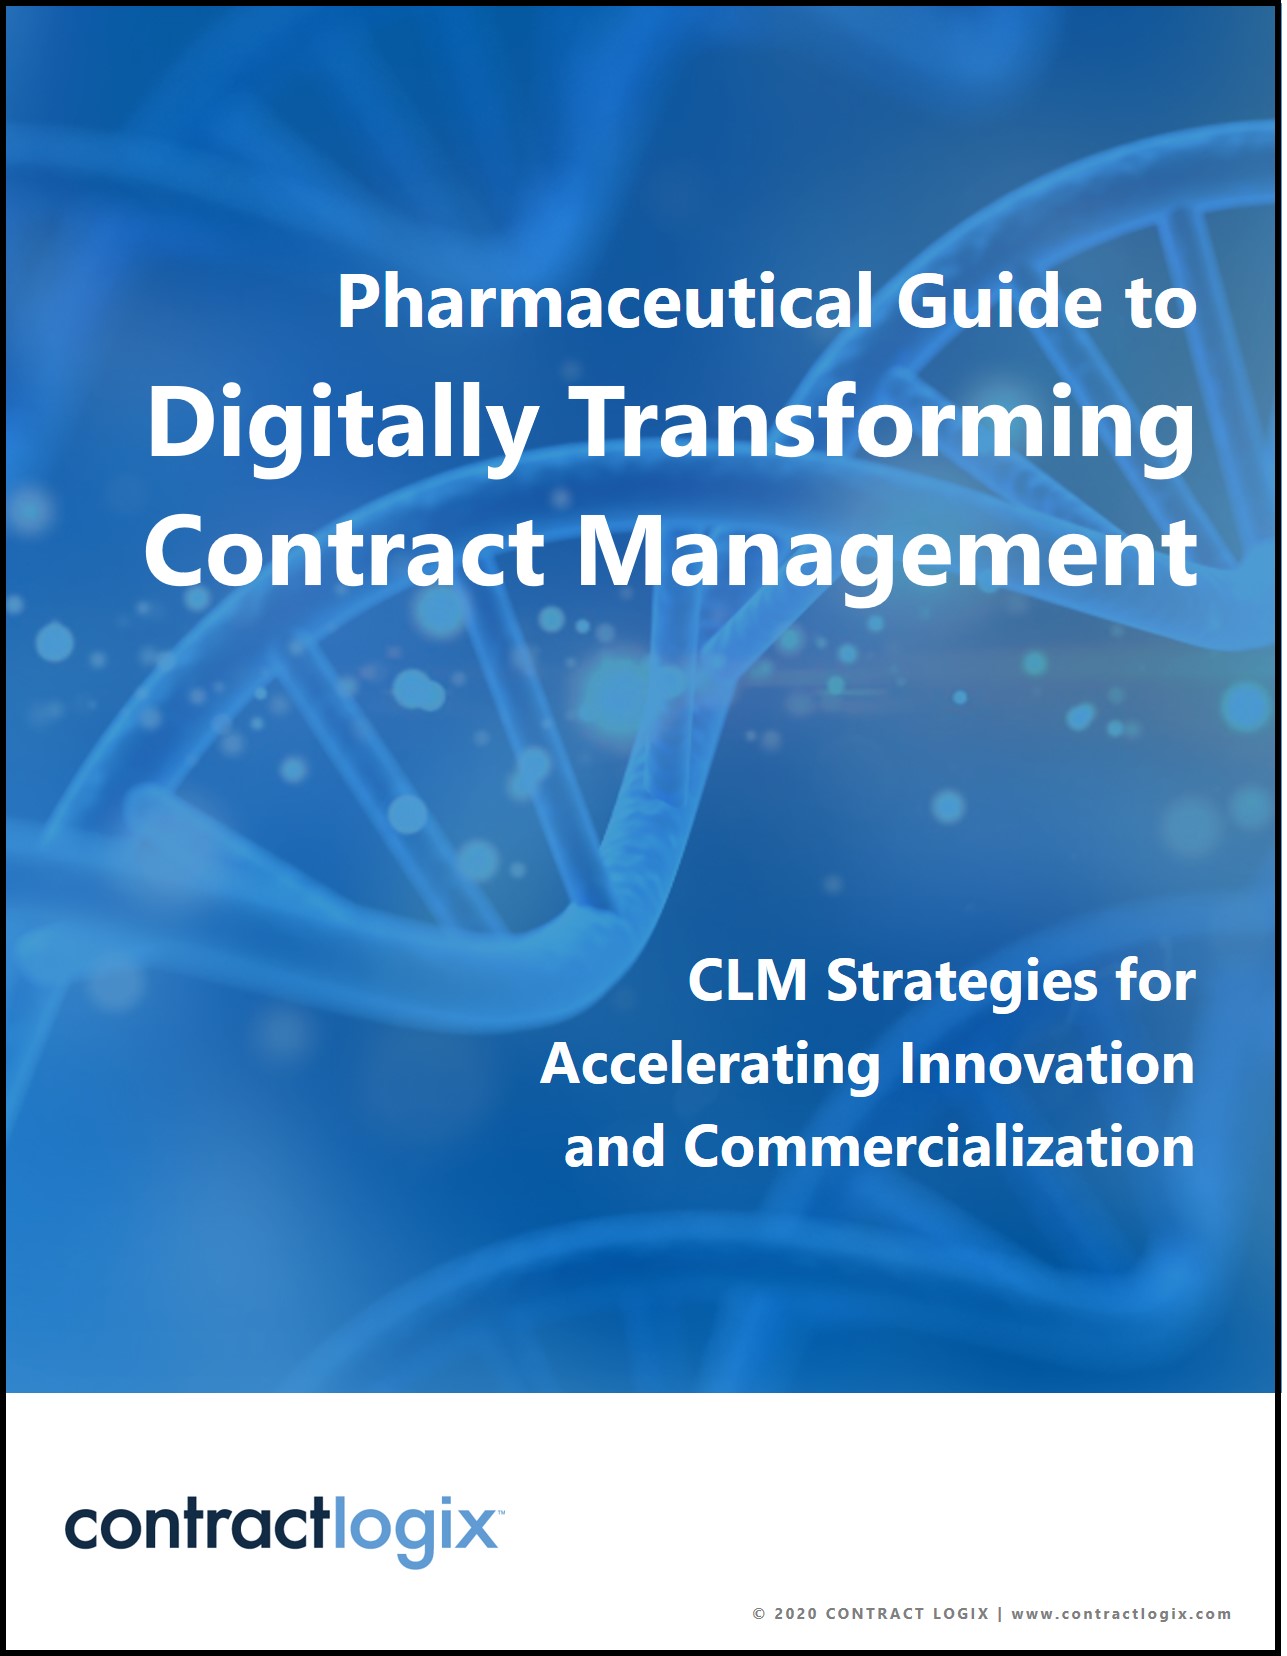 Digitally Transforming Pharmaceutical Contract Management Ebook